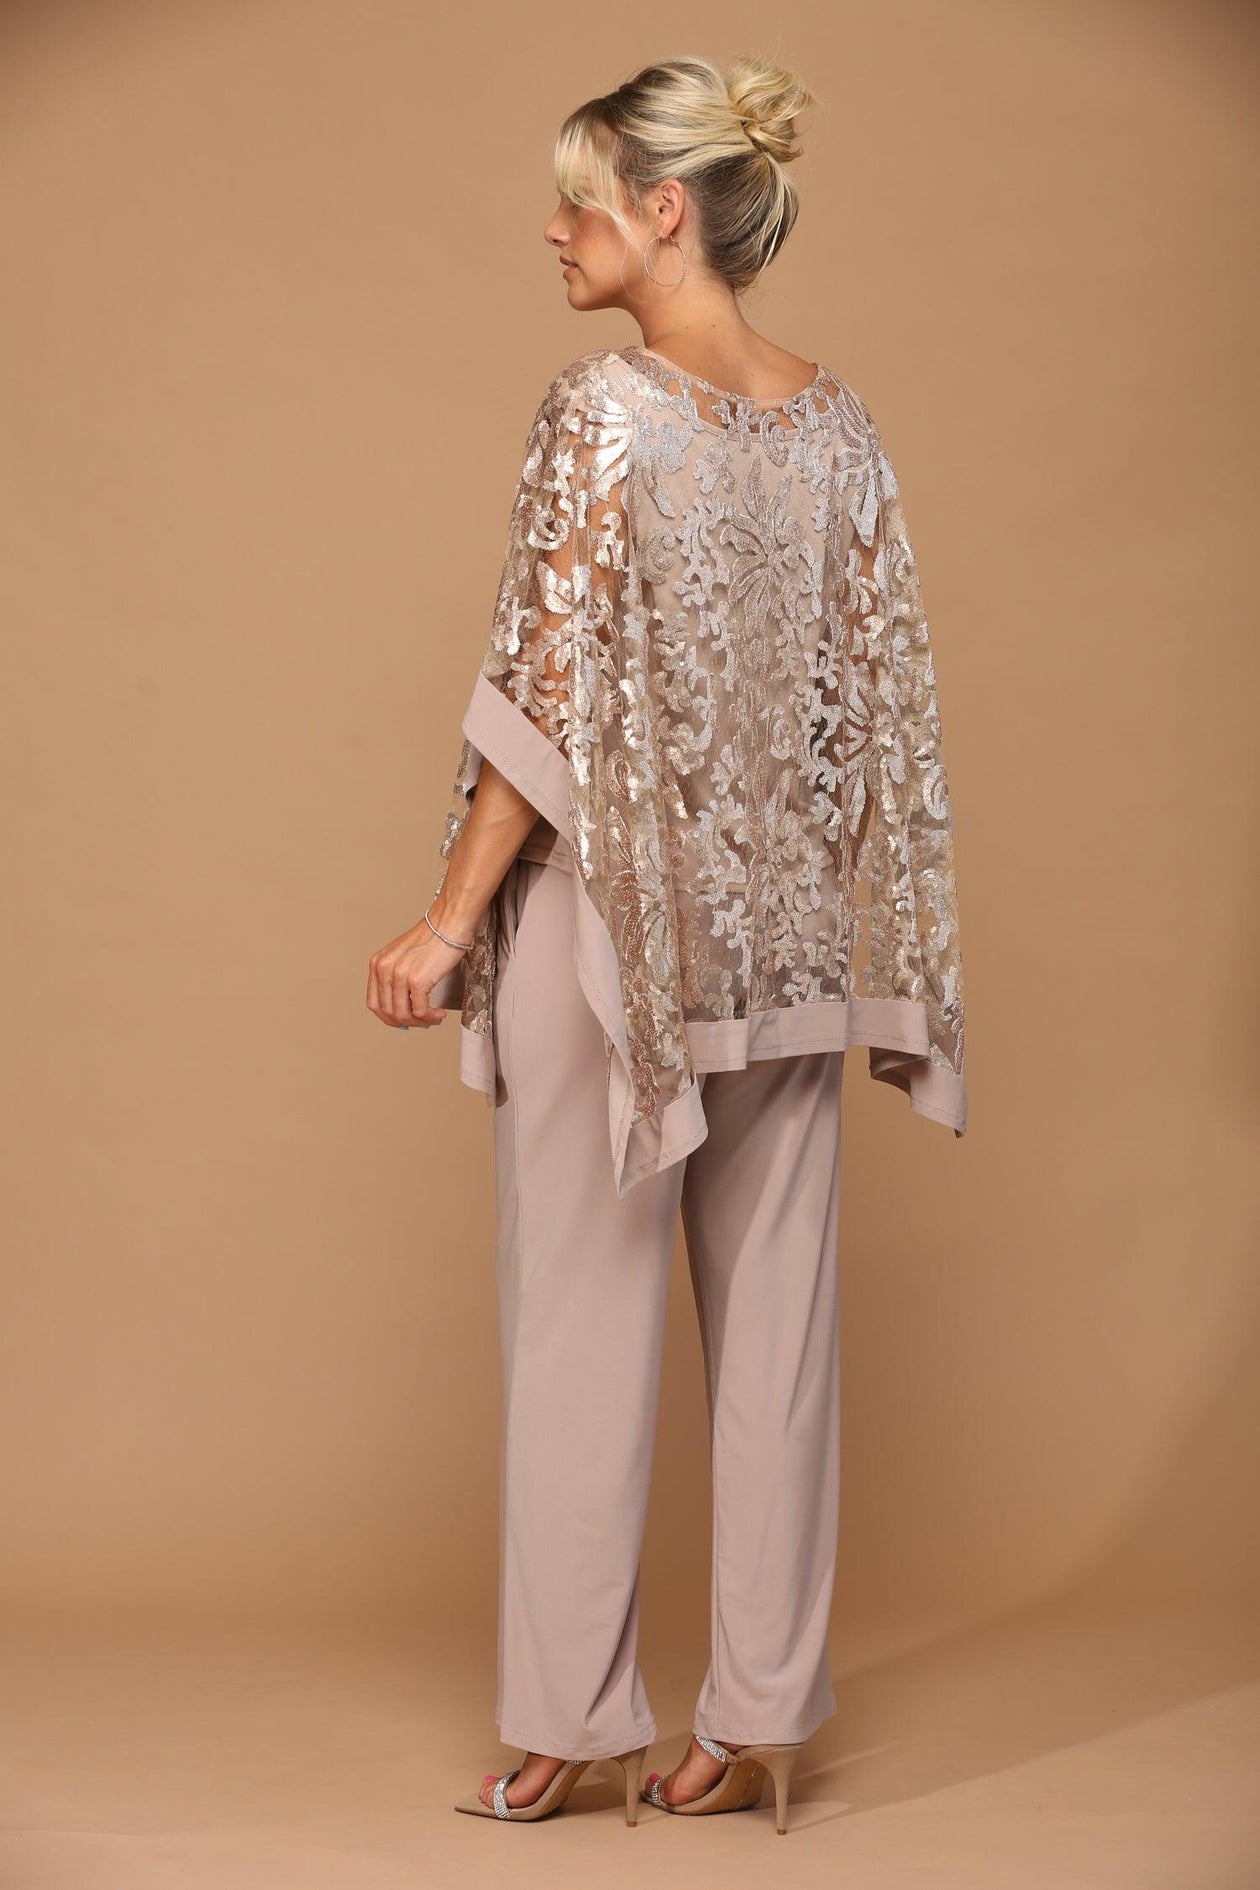 Cocoa Long Formal Mother of the Bride Jacket Pant Suit for $169.99